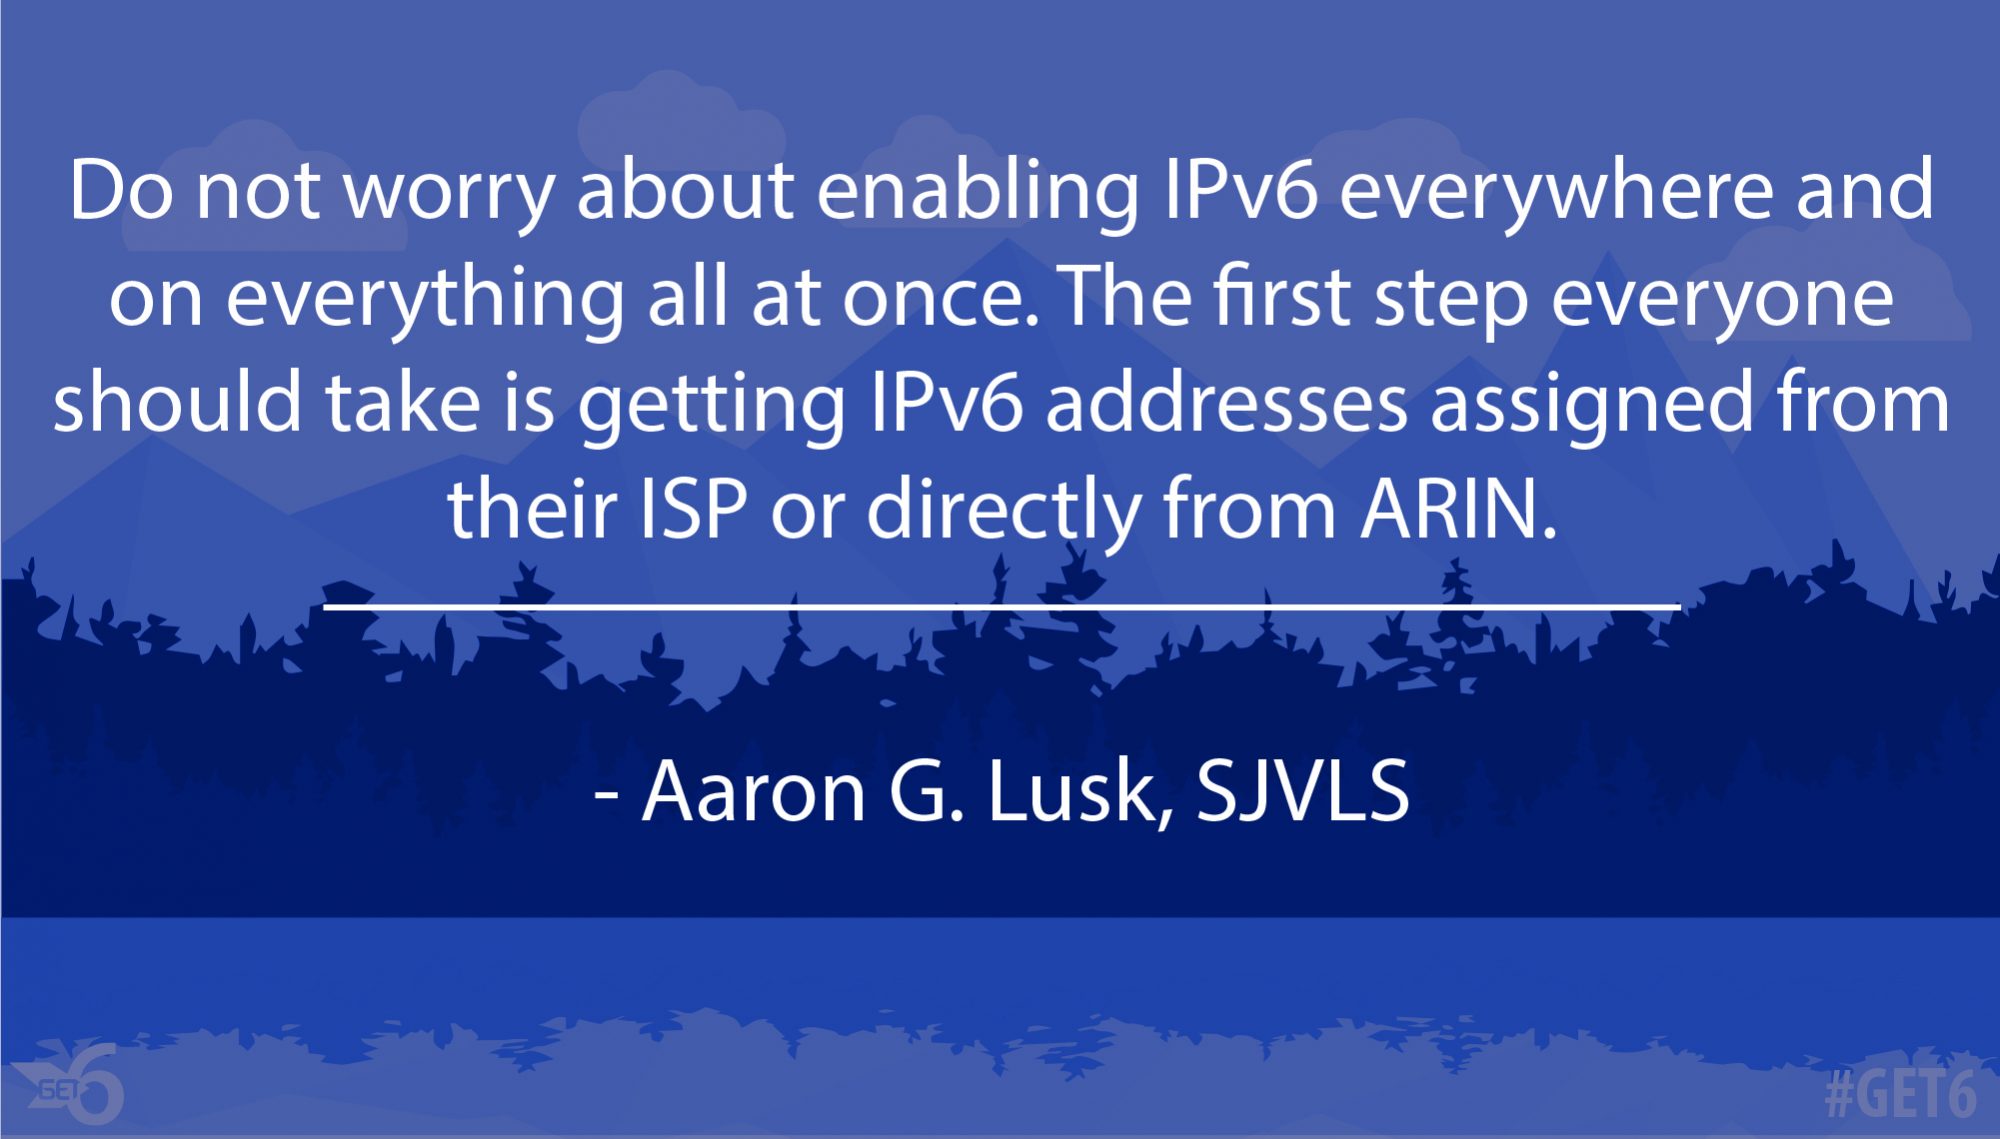 “Do not worry about enabling IPv6 everywhere and on everything all at once.